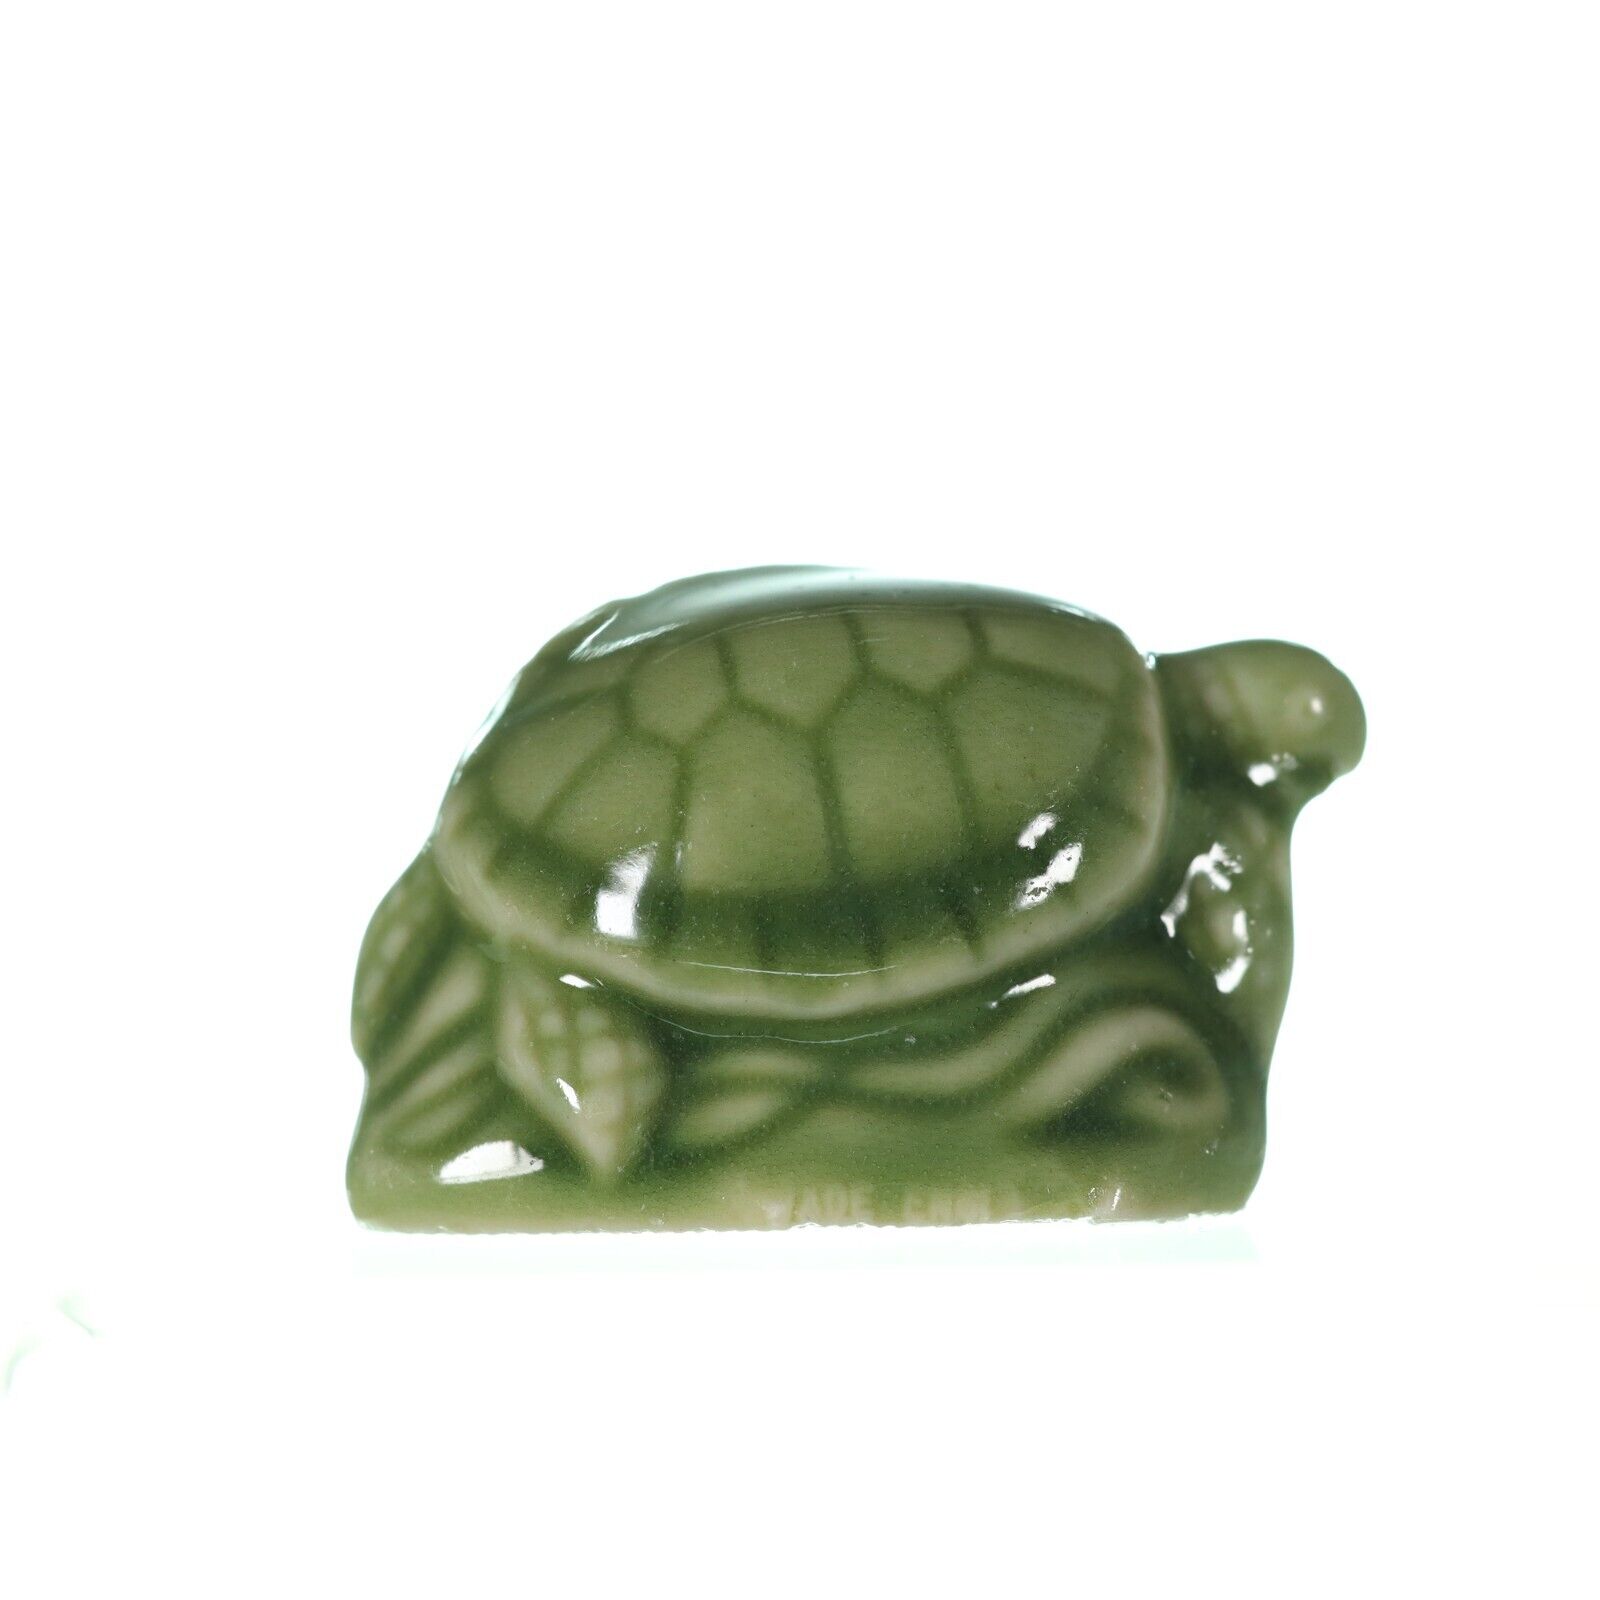 Red Rose Wade - QTY. DISCOUNTS UP TO 30% OFF - choice of 3 Marine Life figurines